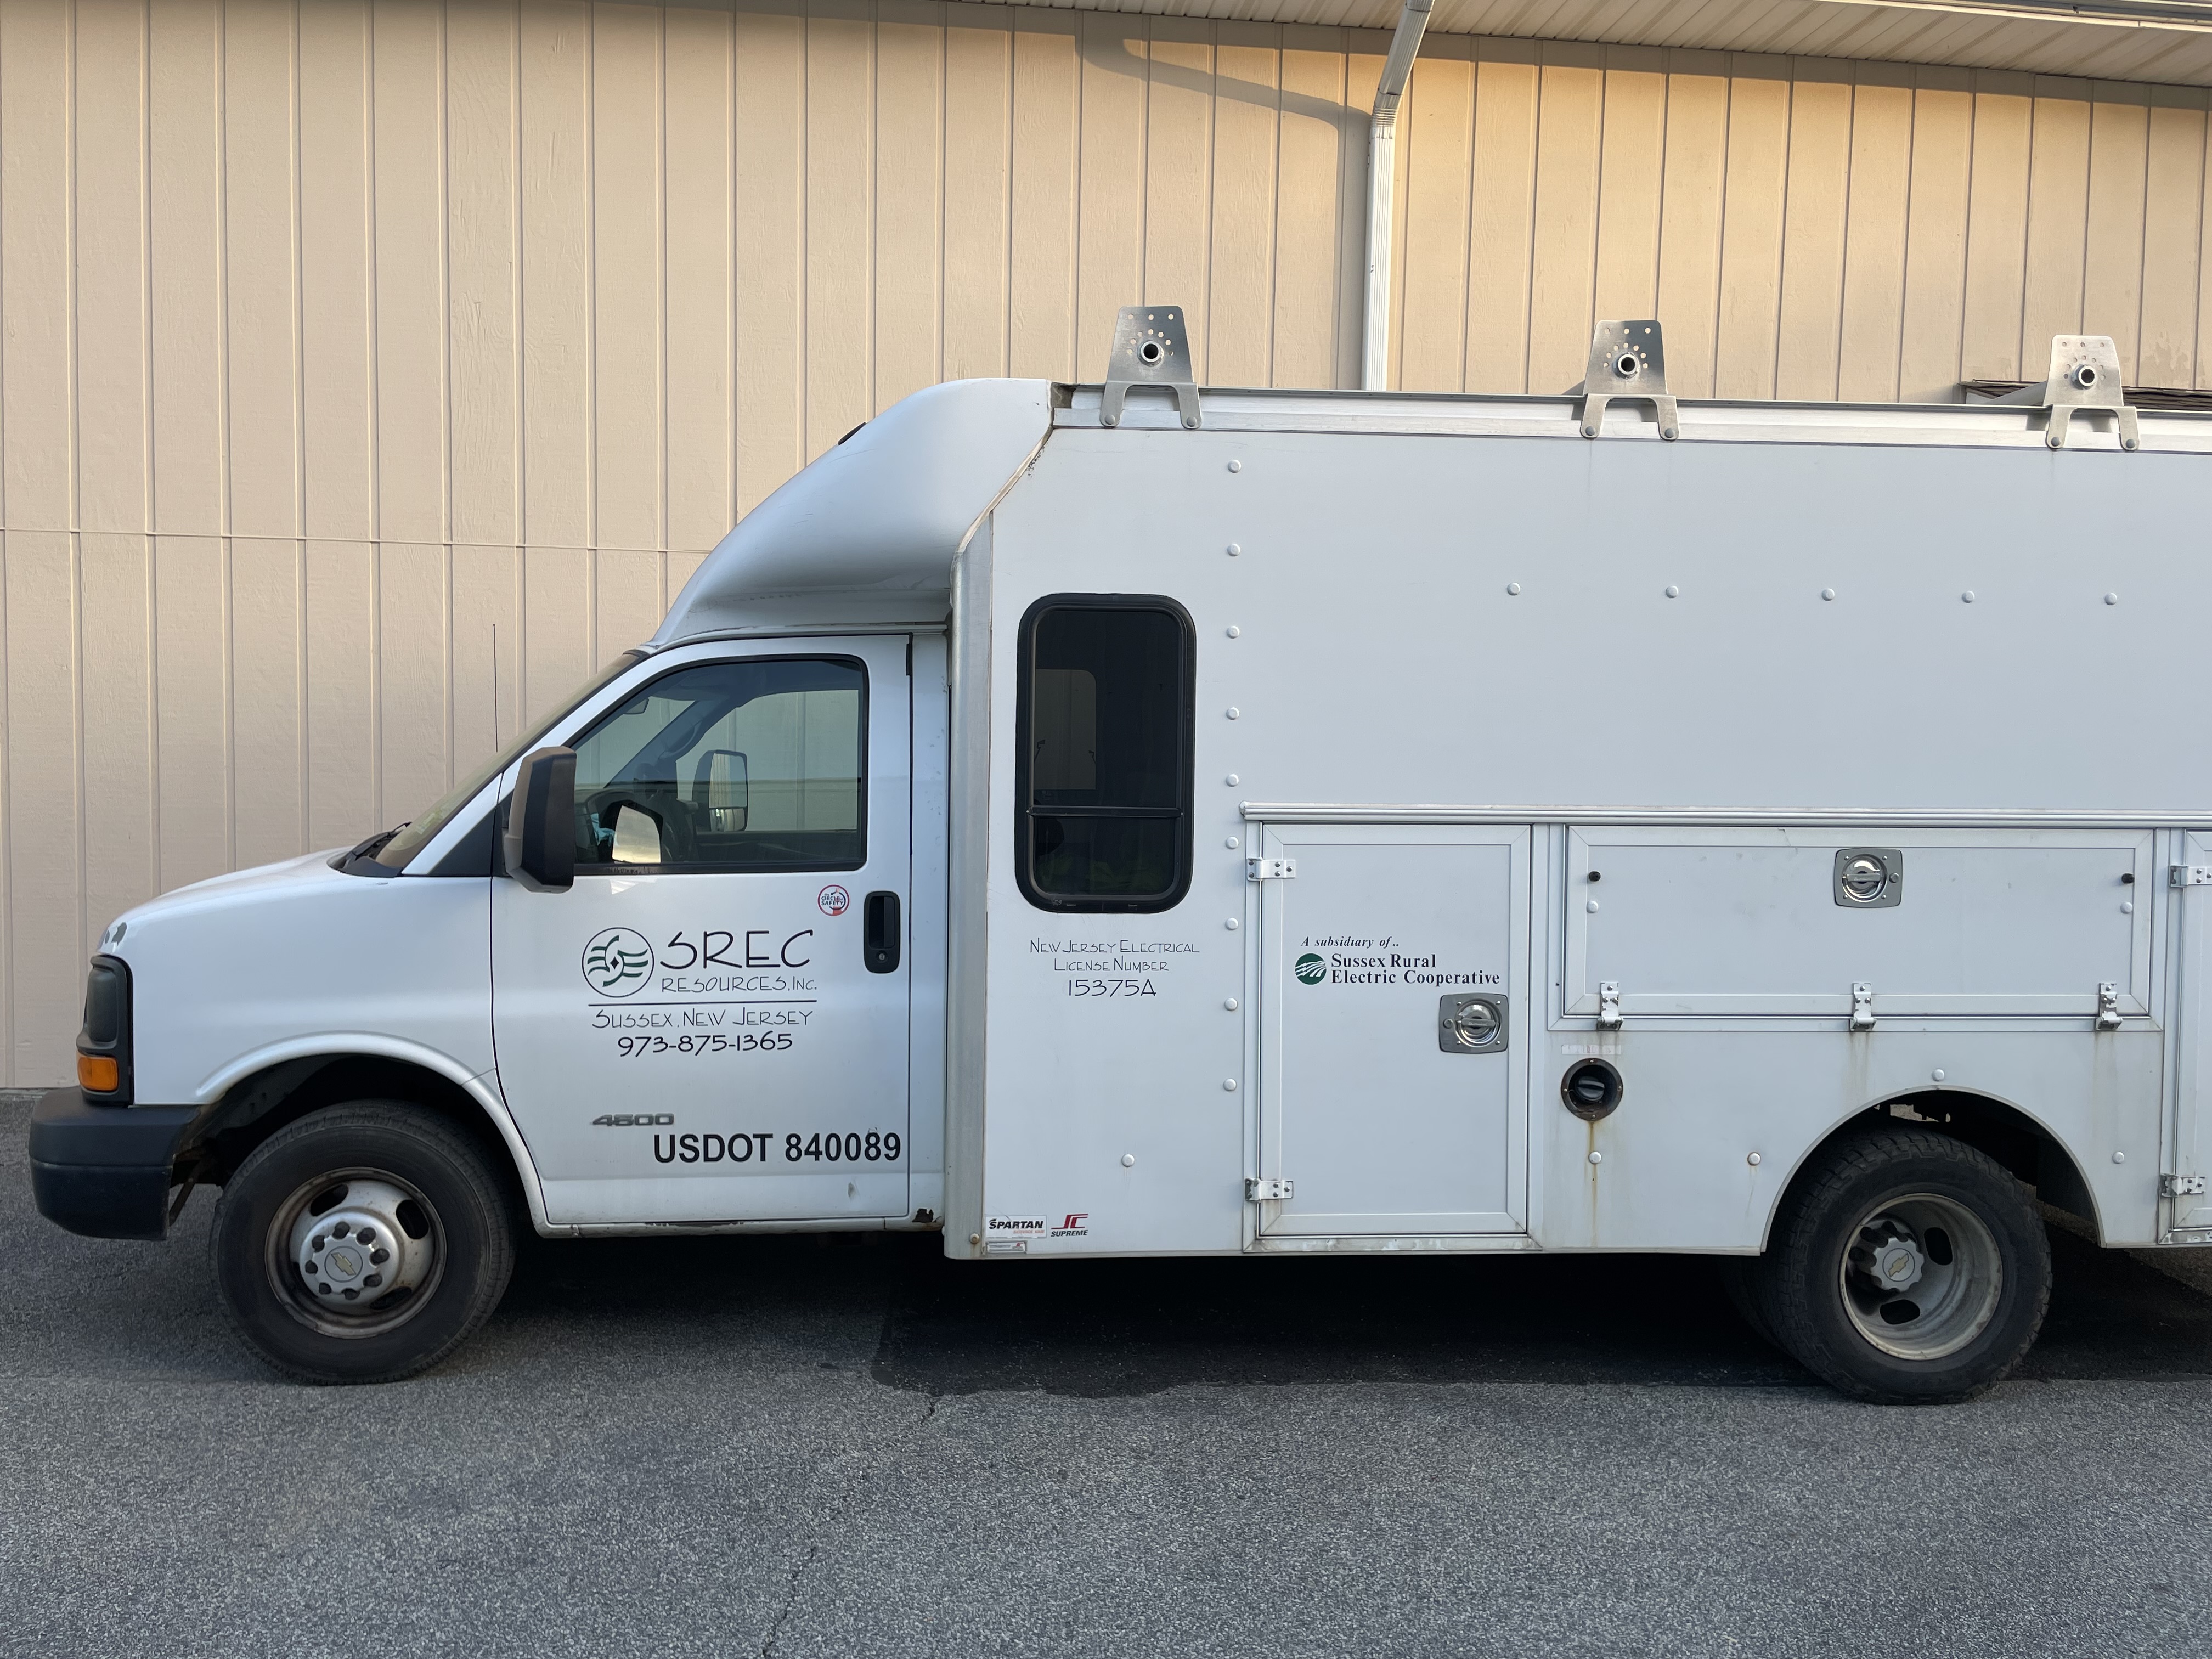 Pictured: A truck used by SREC Resources, Sussex Rural Electric Cooperative’s wholly-owned electrical contracting subsidiary.